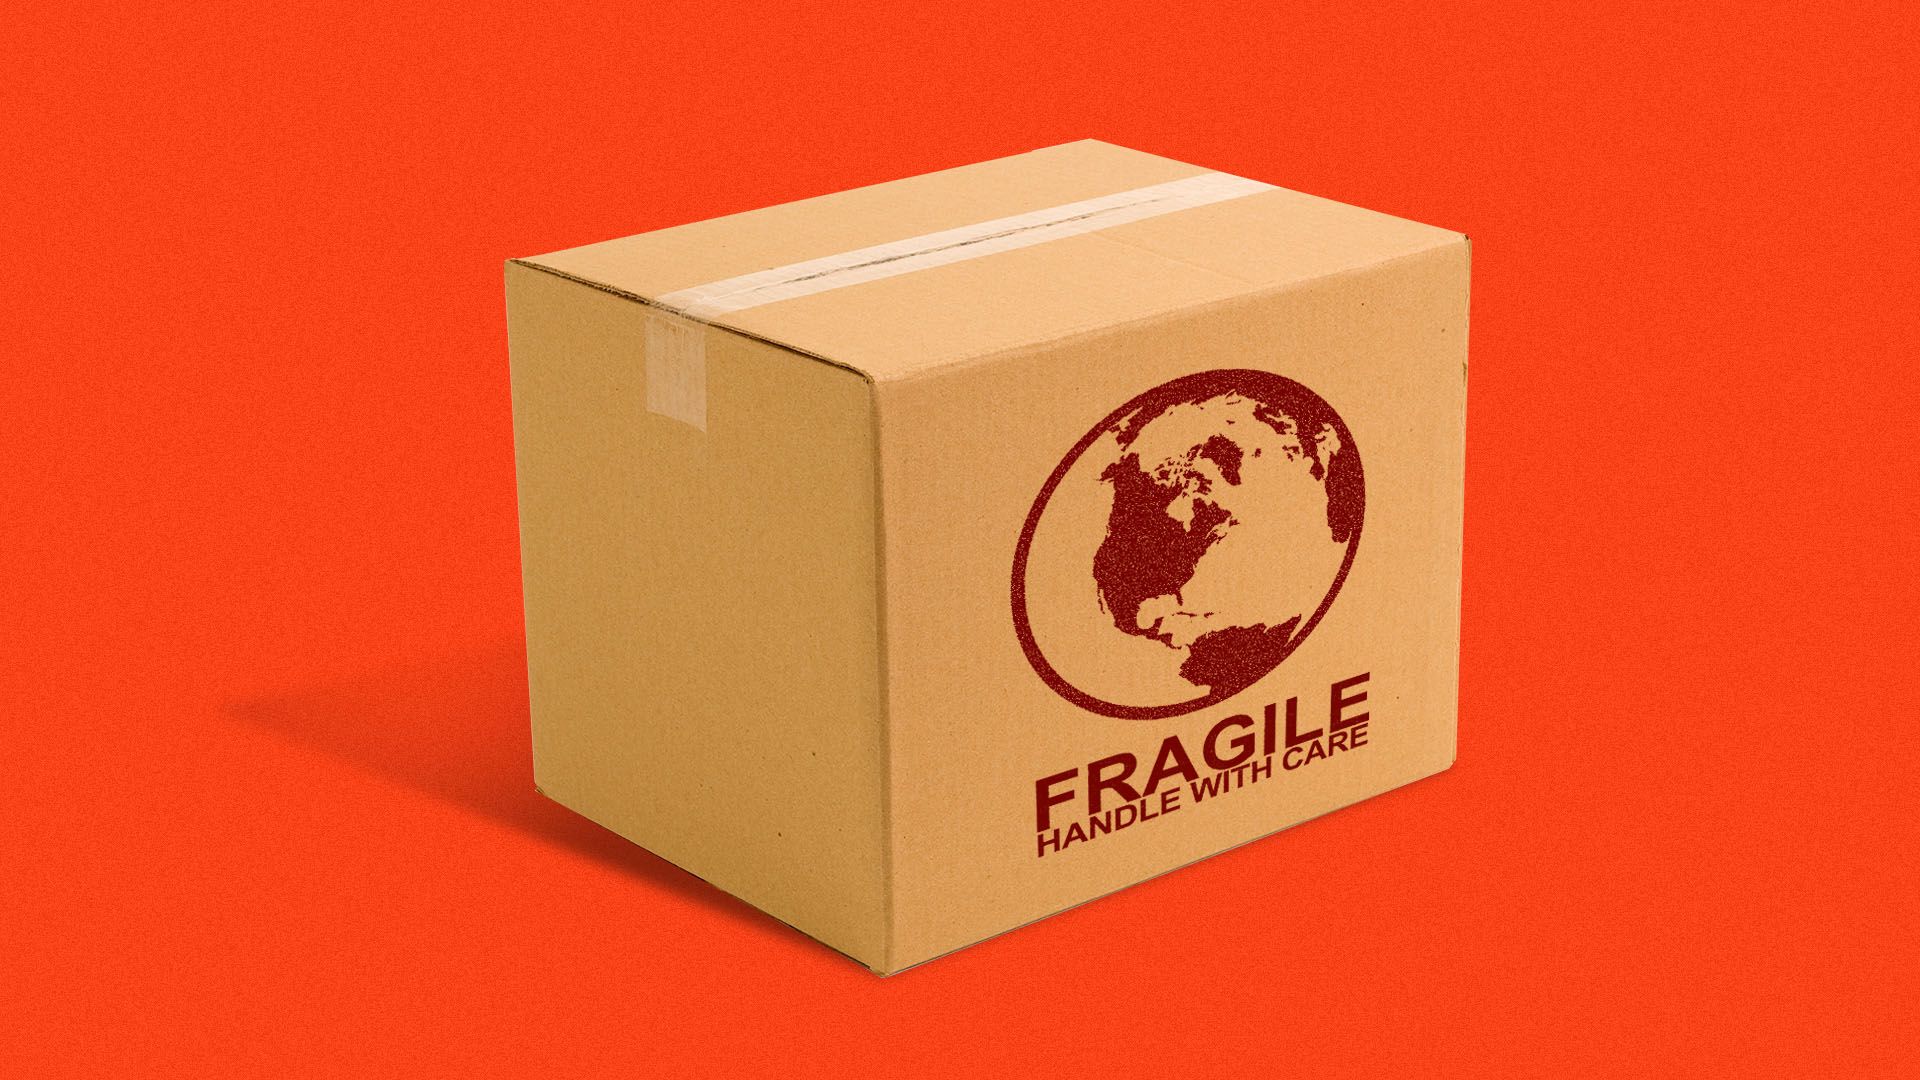  Illustration of a package with an earth logo on it and the words "fragile, handle with care"